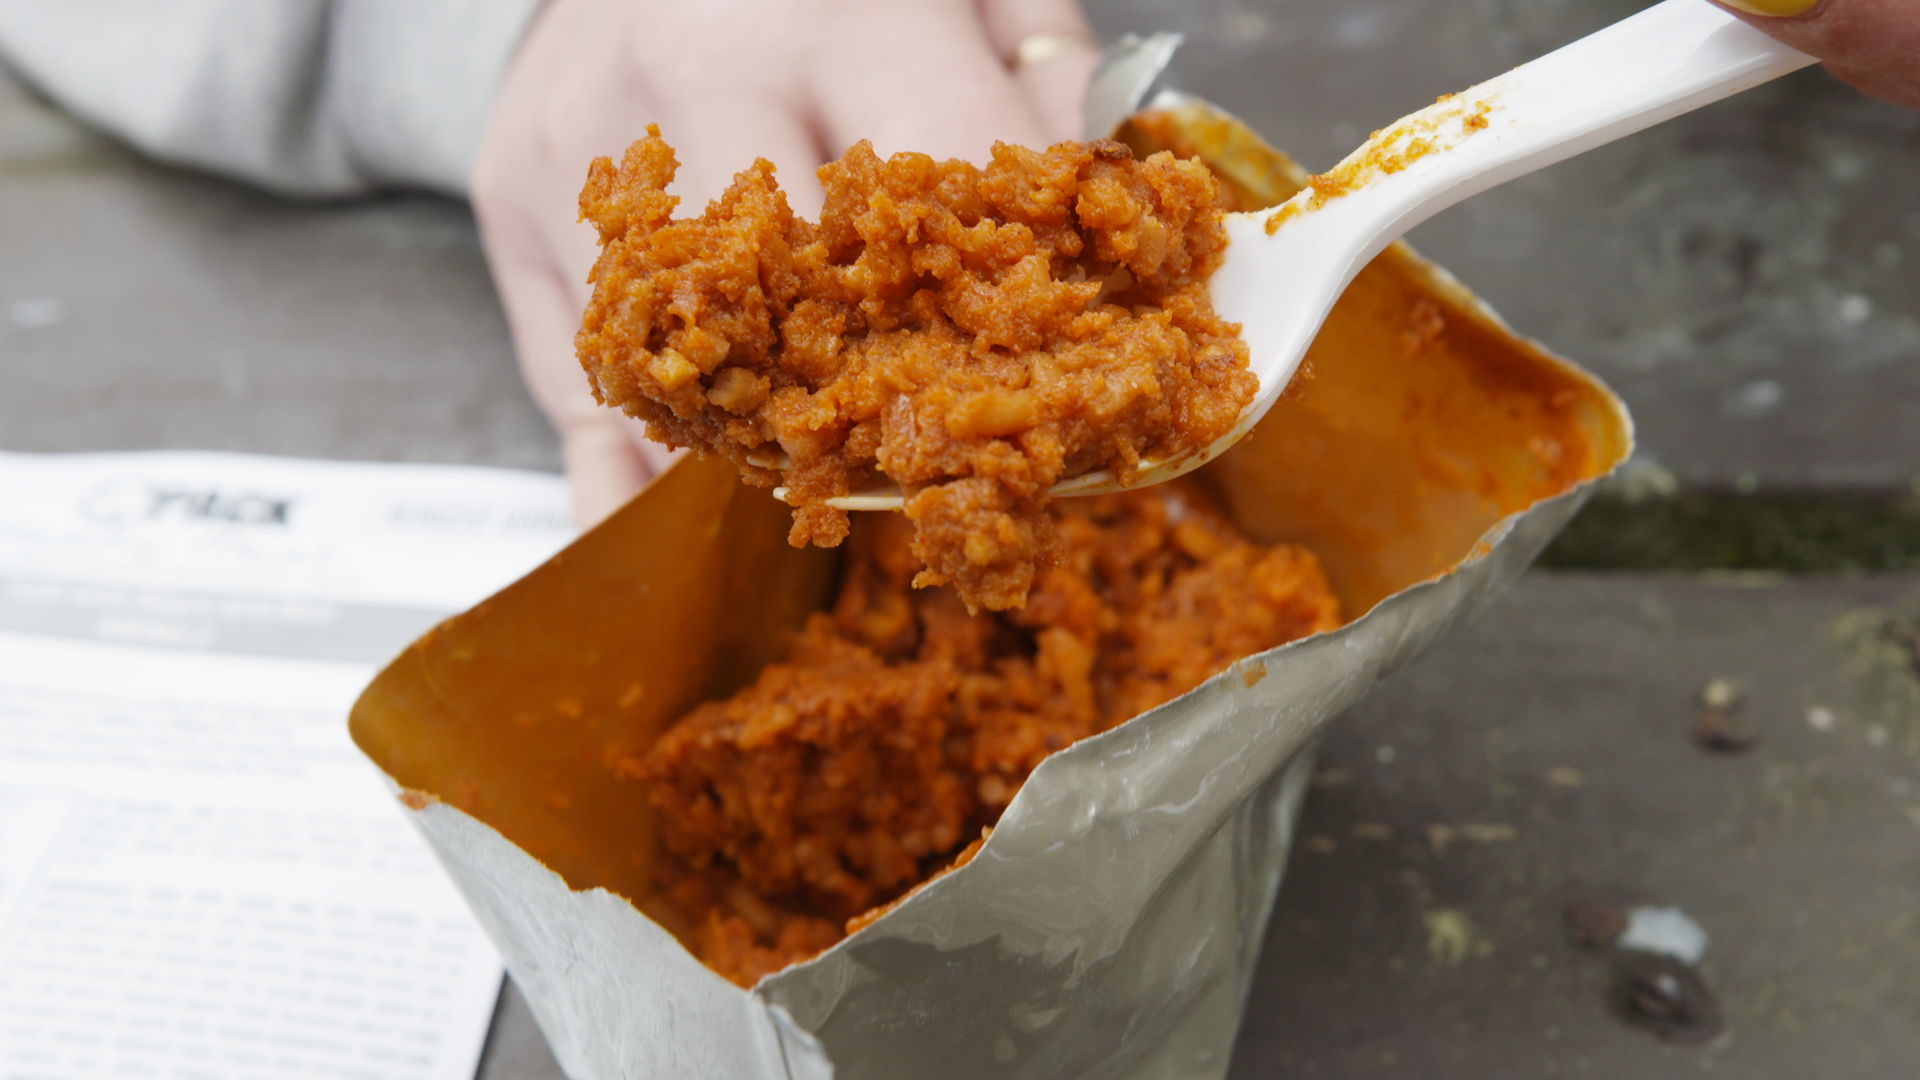 best mre meals - ﻿mre meals list - 12 Of The Best And Worst MREs, Ranked